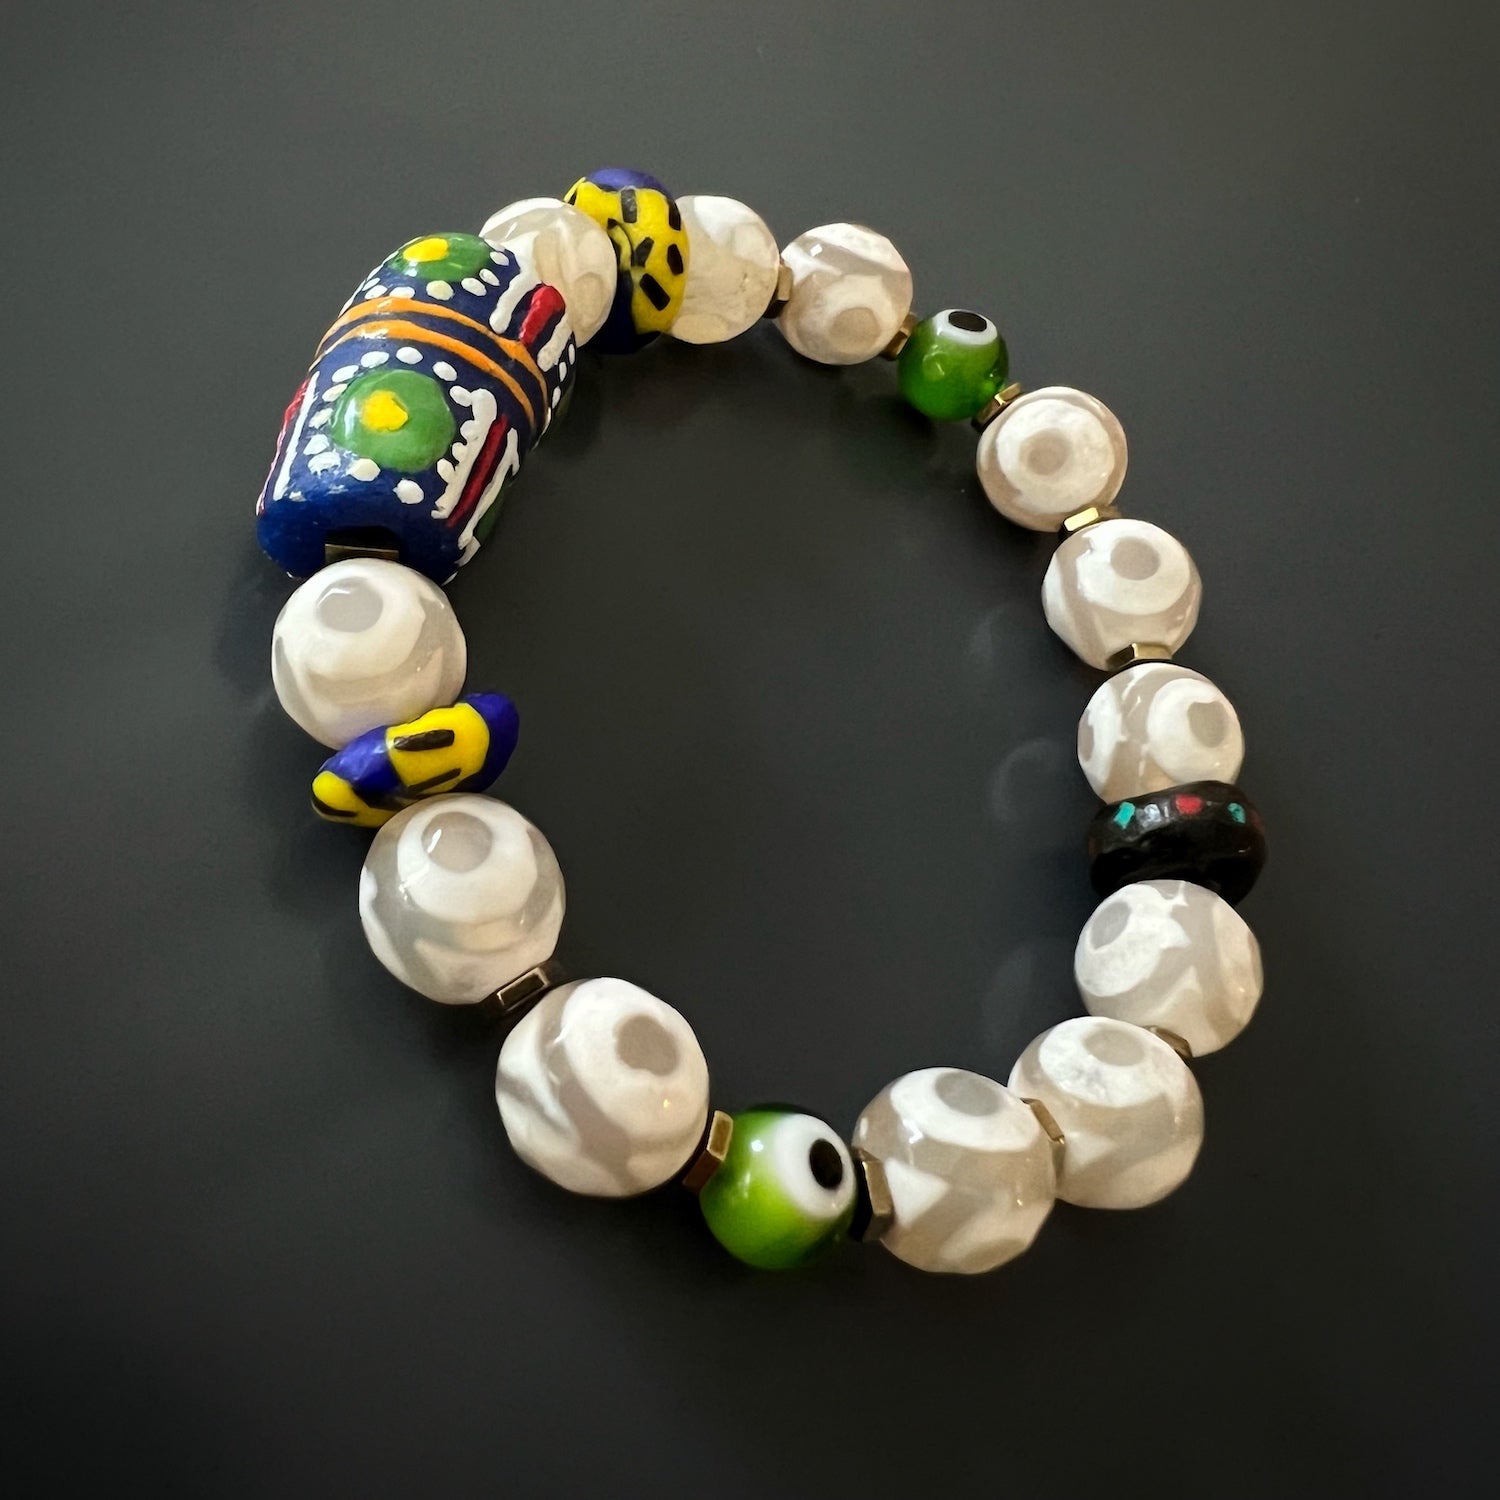 Stay protected and stylish with the Eye of Colors Bracelet, adorned with white agate stone beads, hand-painted African beads, and eye-catching green evil eye beads.